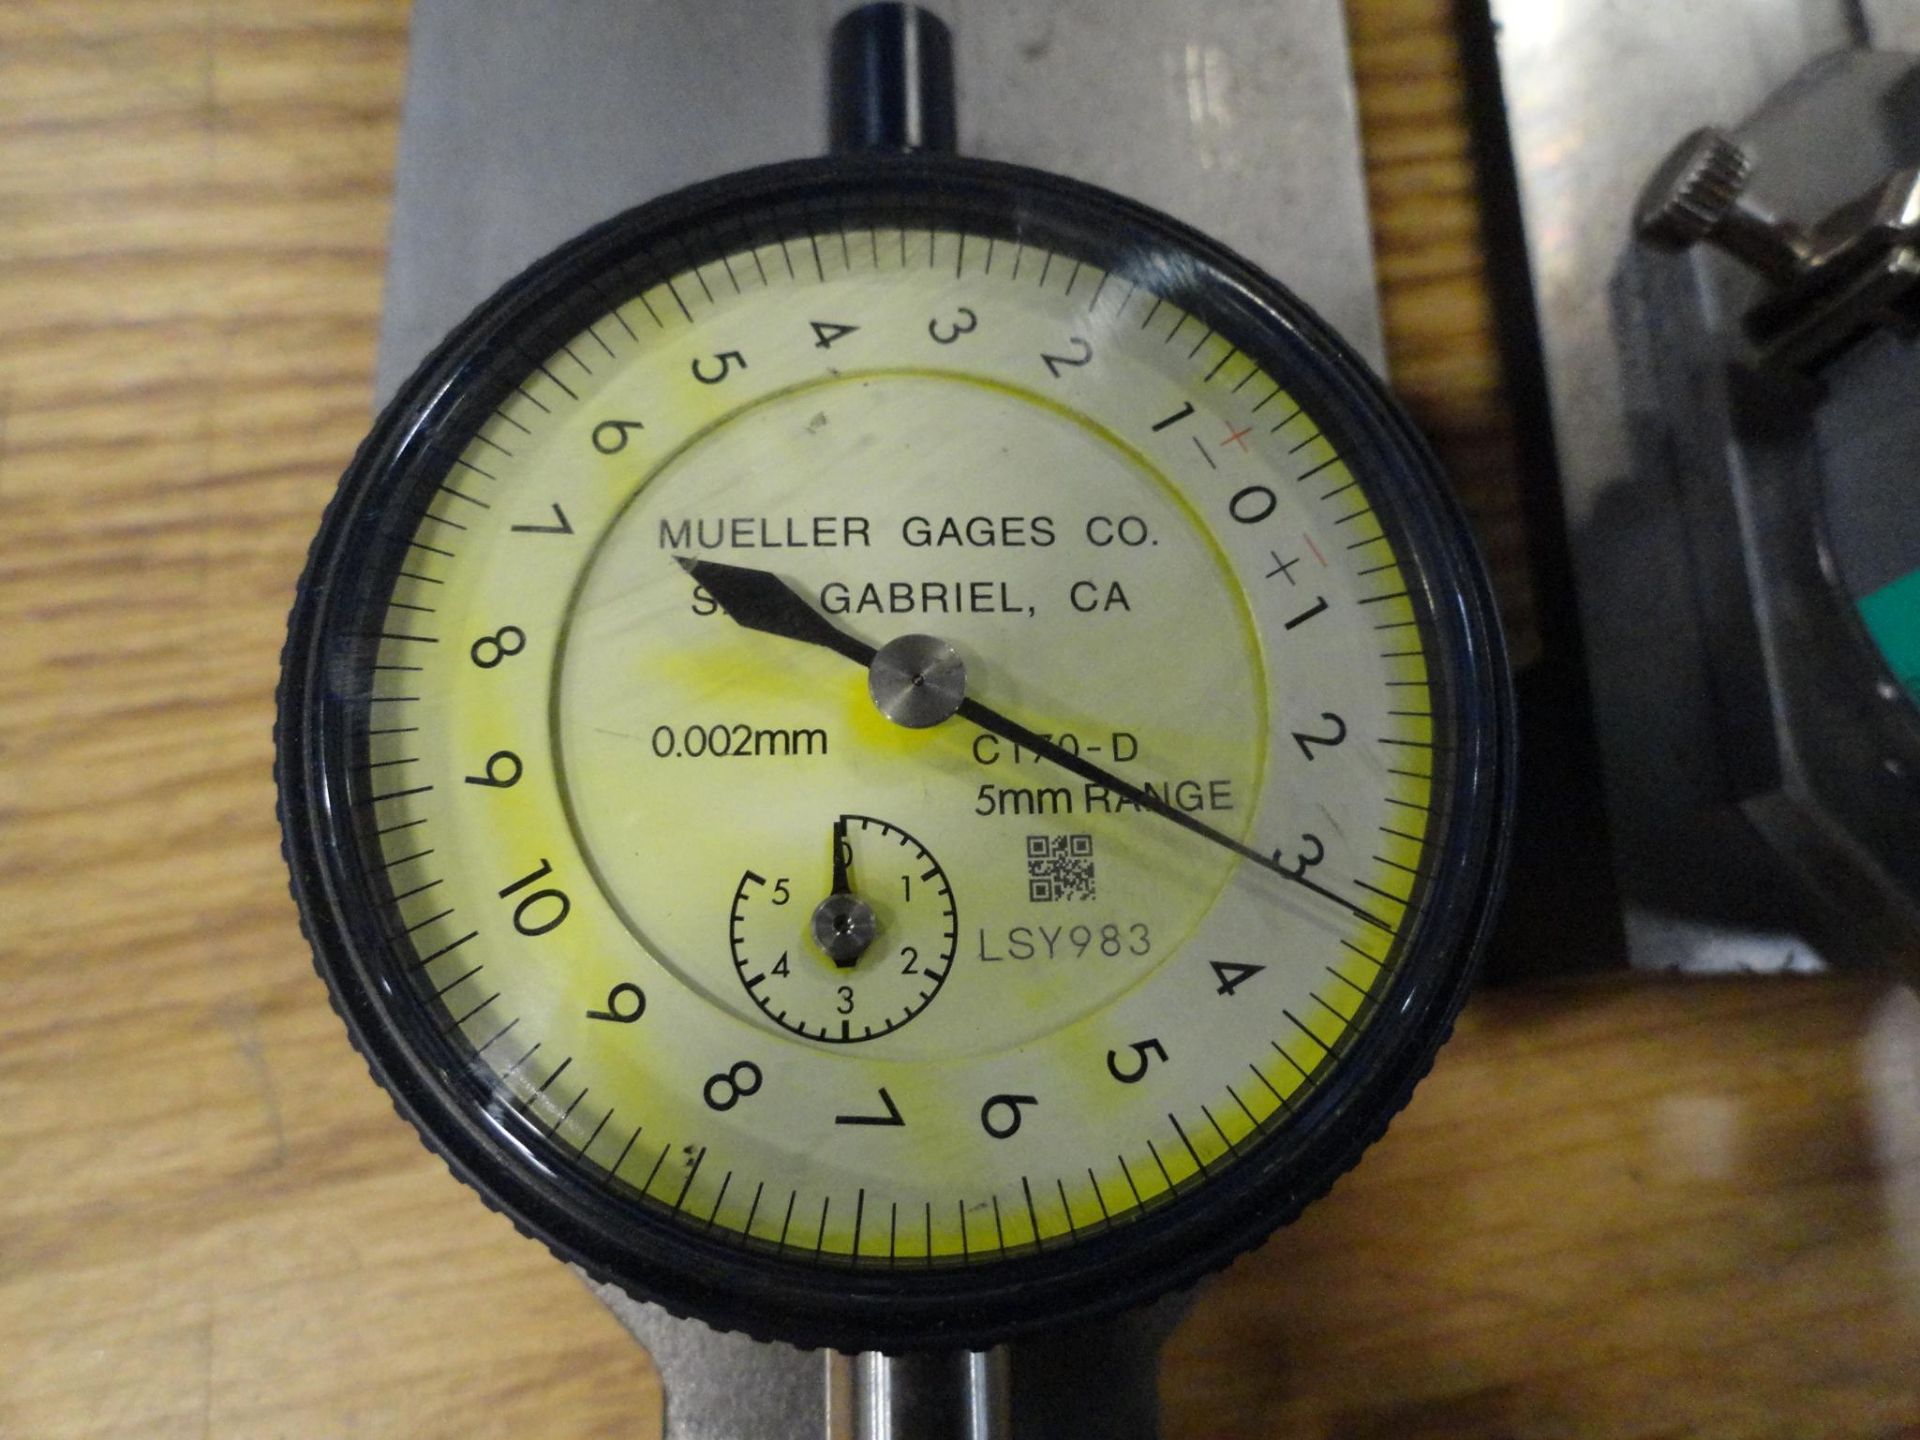 (3) Mueller Gages Indicators no. C170-D, 5mm range, .002mm increments, on metal table 3 x 6 inch